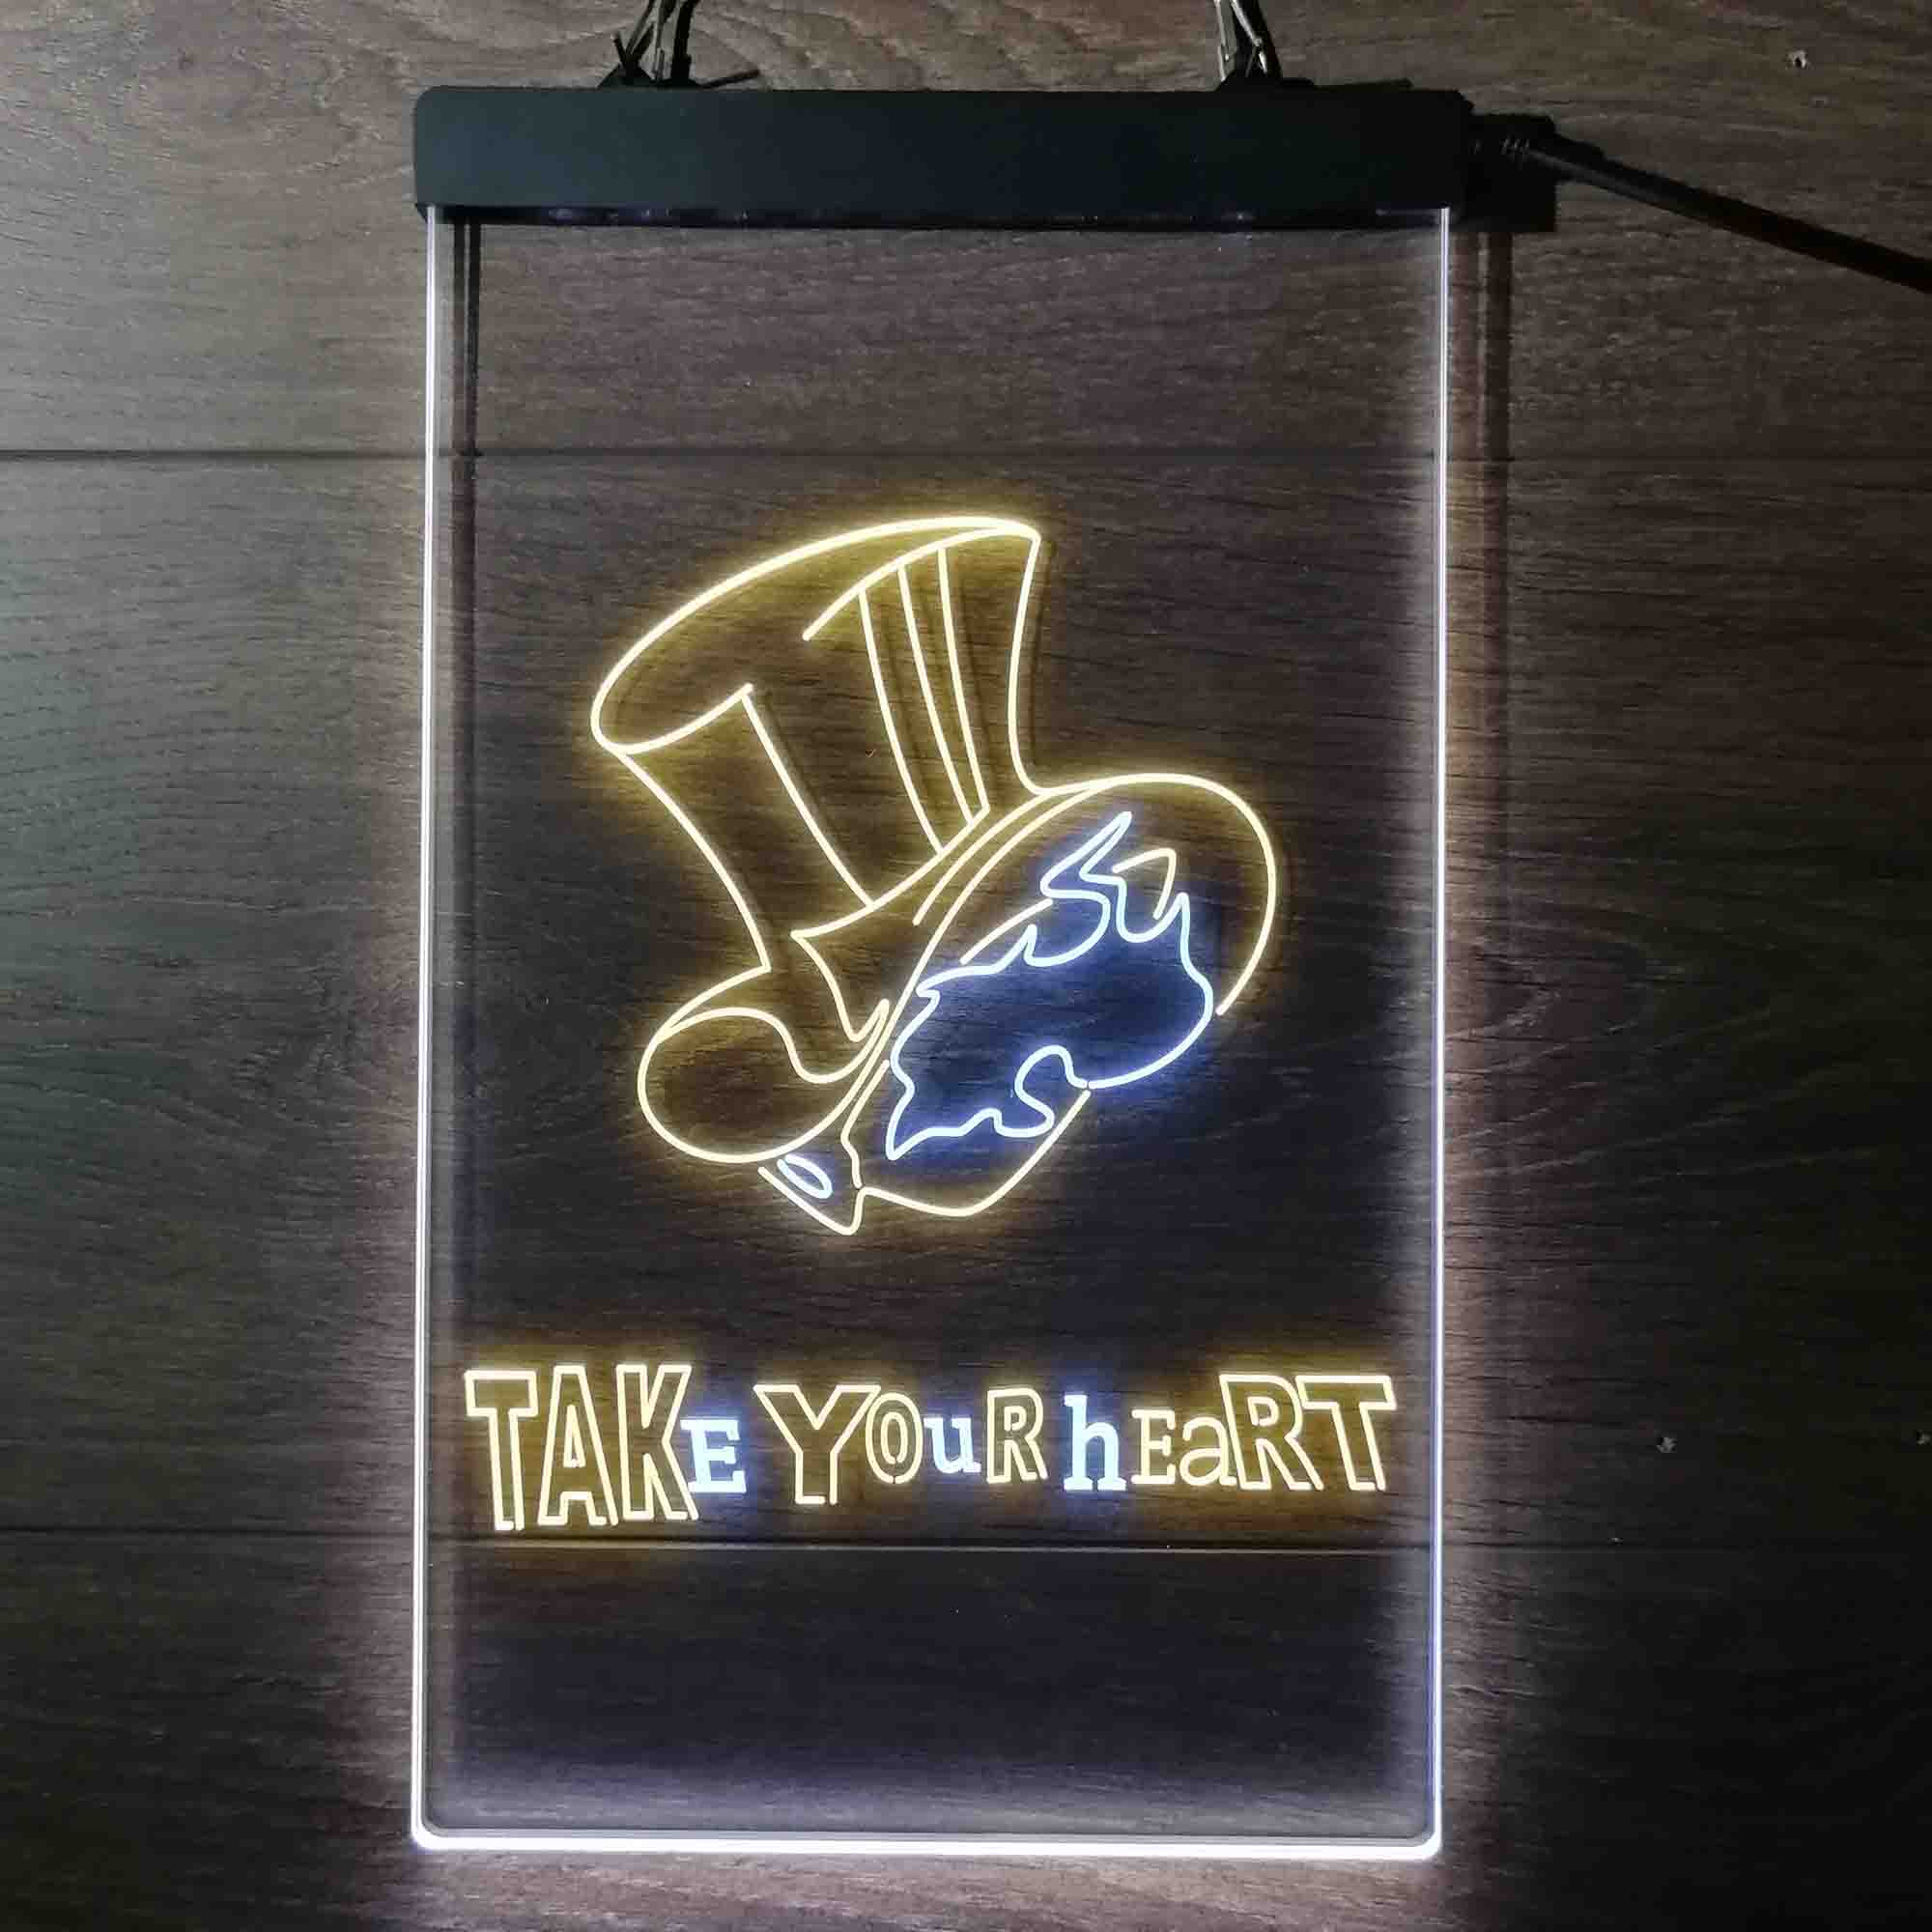 Persona 5 Take Your Heart Neon LED Sign